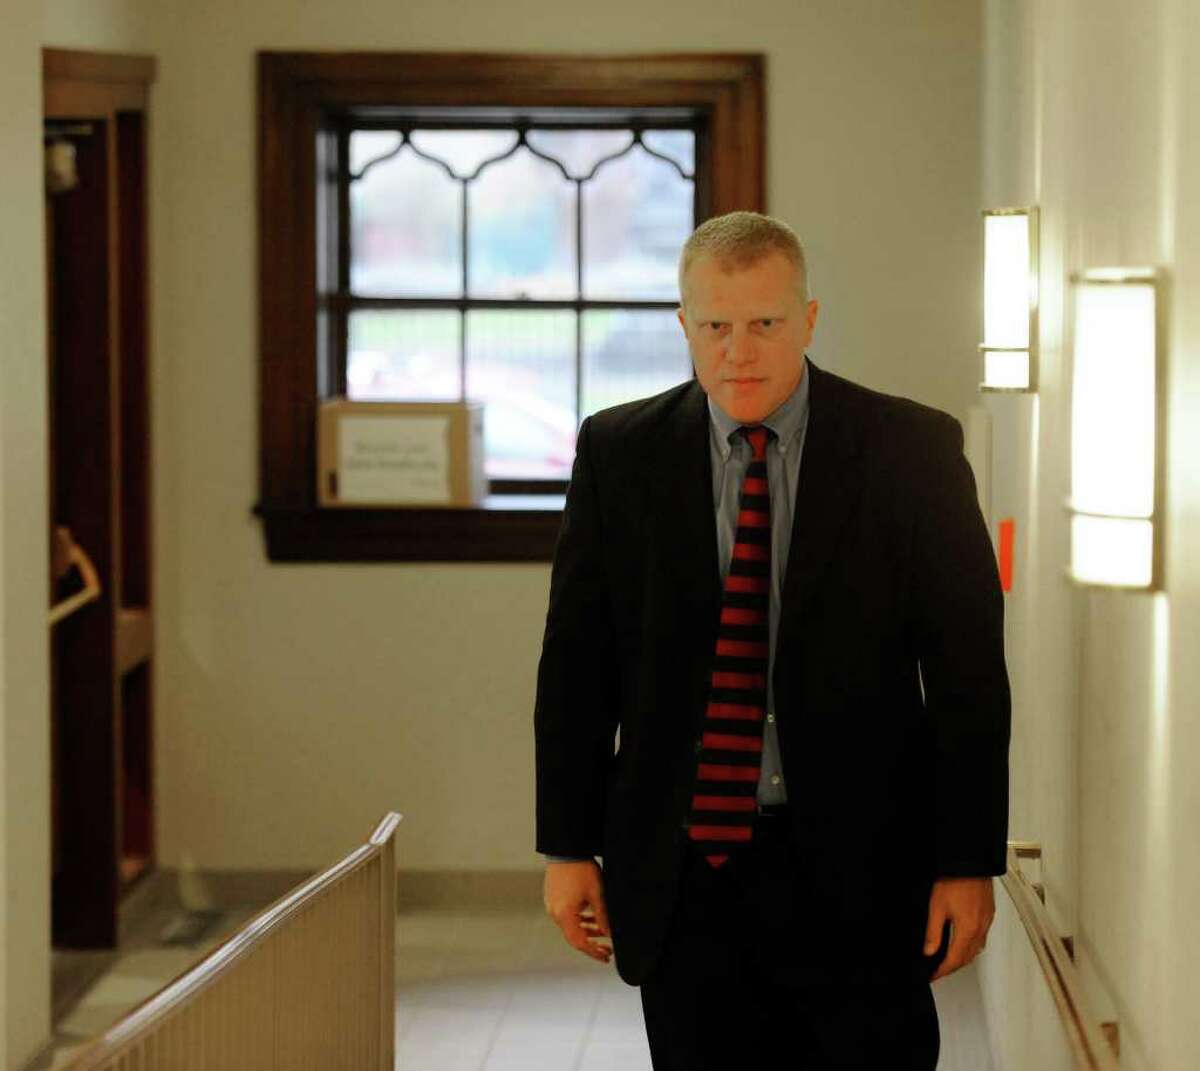 Trey Smith, the special prosecutor investigating the ongoing ballot fraud scandal, enters the Rensselaer County Courthouse in Troy, N.Y., in December 2011. (Skip Dickstein / Times Union archive)